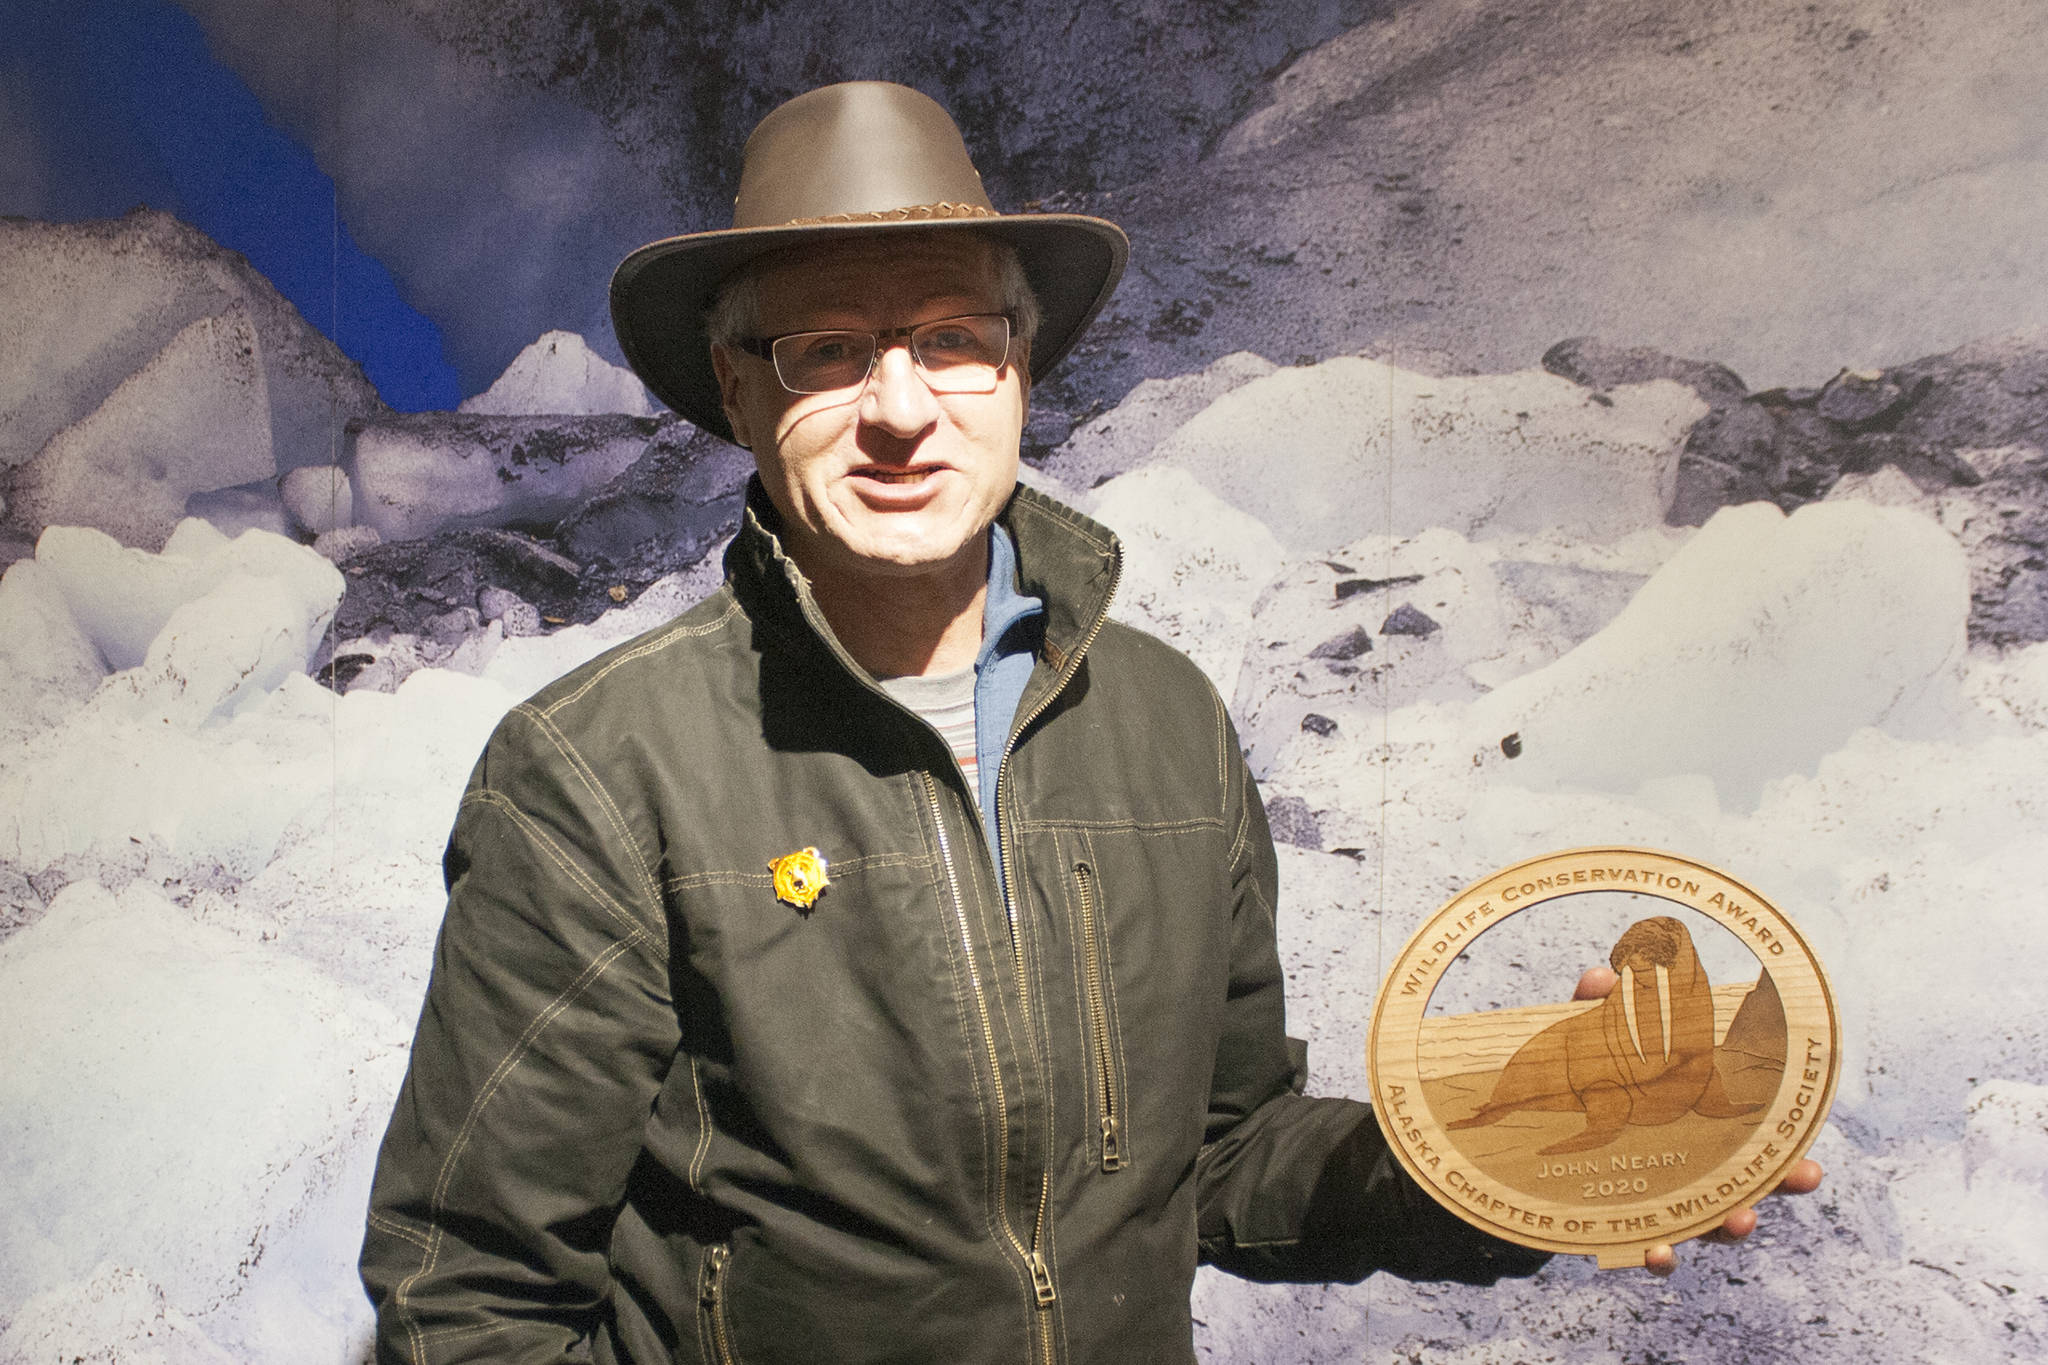 Former Mendenhall Glacier Visitor Center Director John Neary holds his 2020 Wildlife Conservation Lifetime Achievement Award from the Alaska Chapter of the Wildlife Society Friday evening at the visitor center. (Ben Hohenstatt | Juneau Empire)